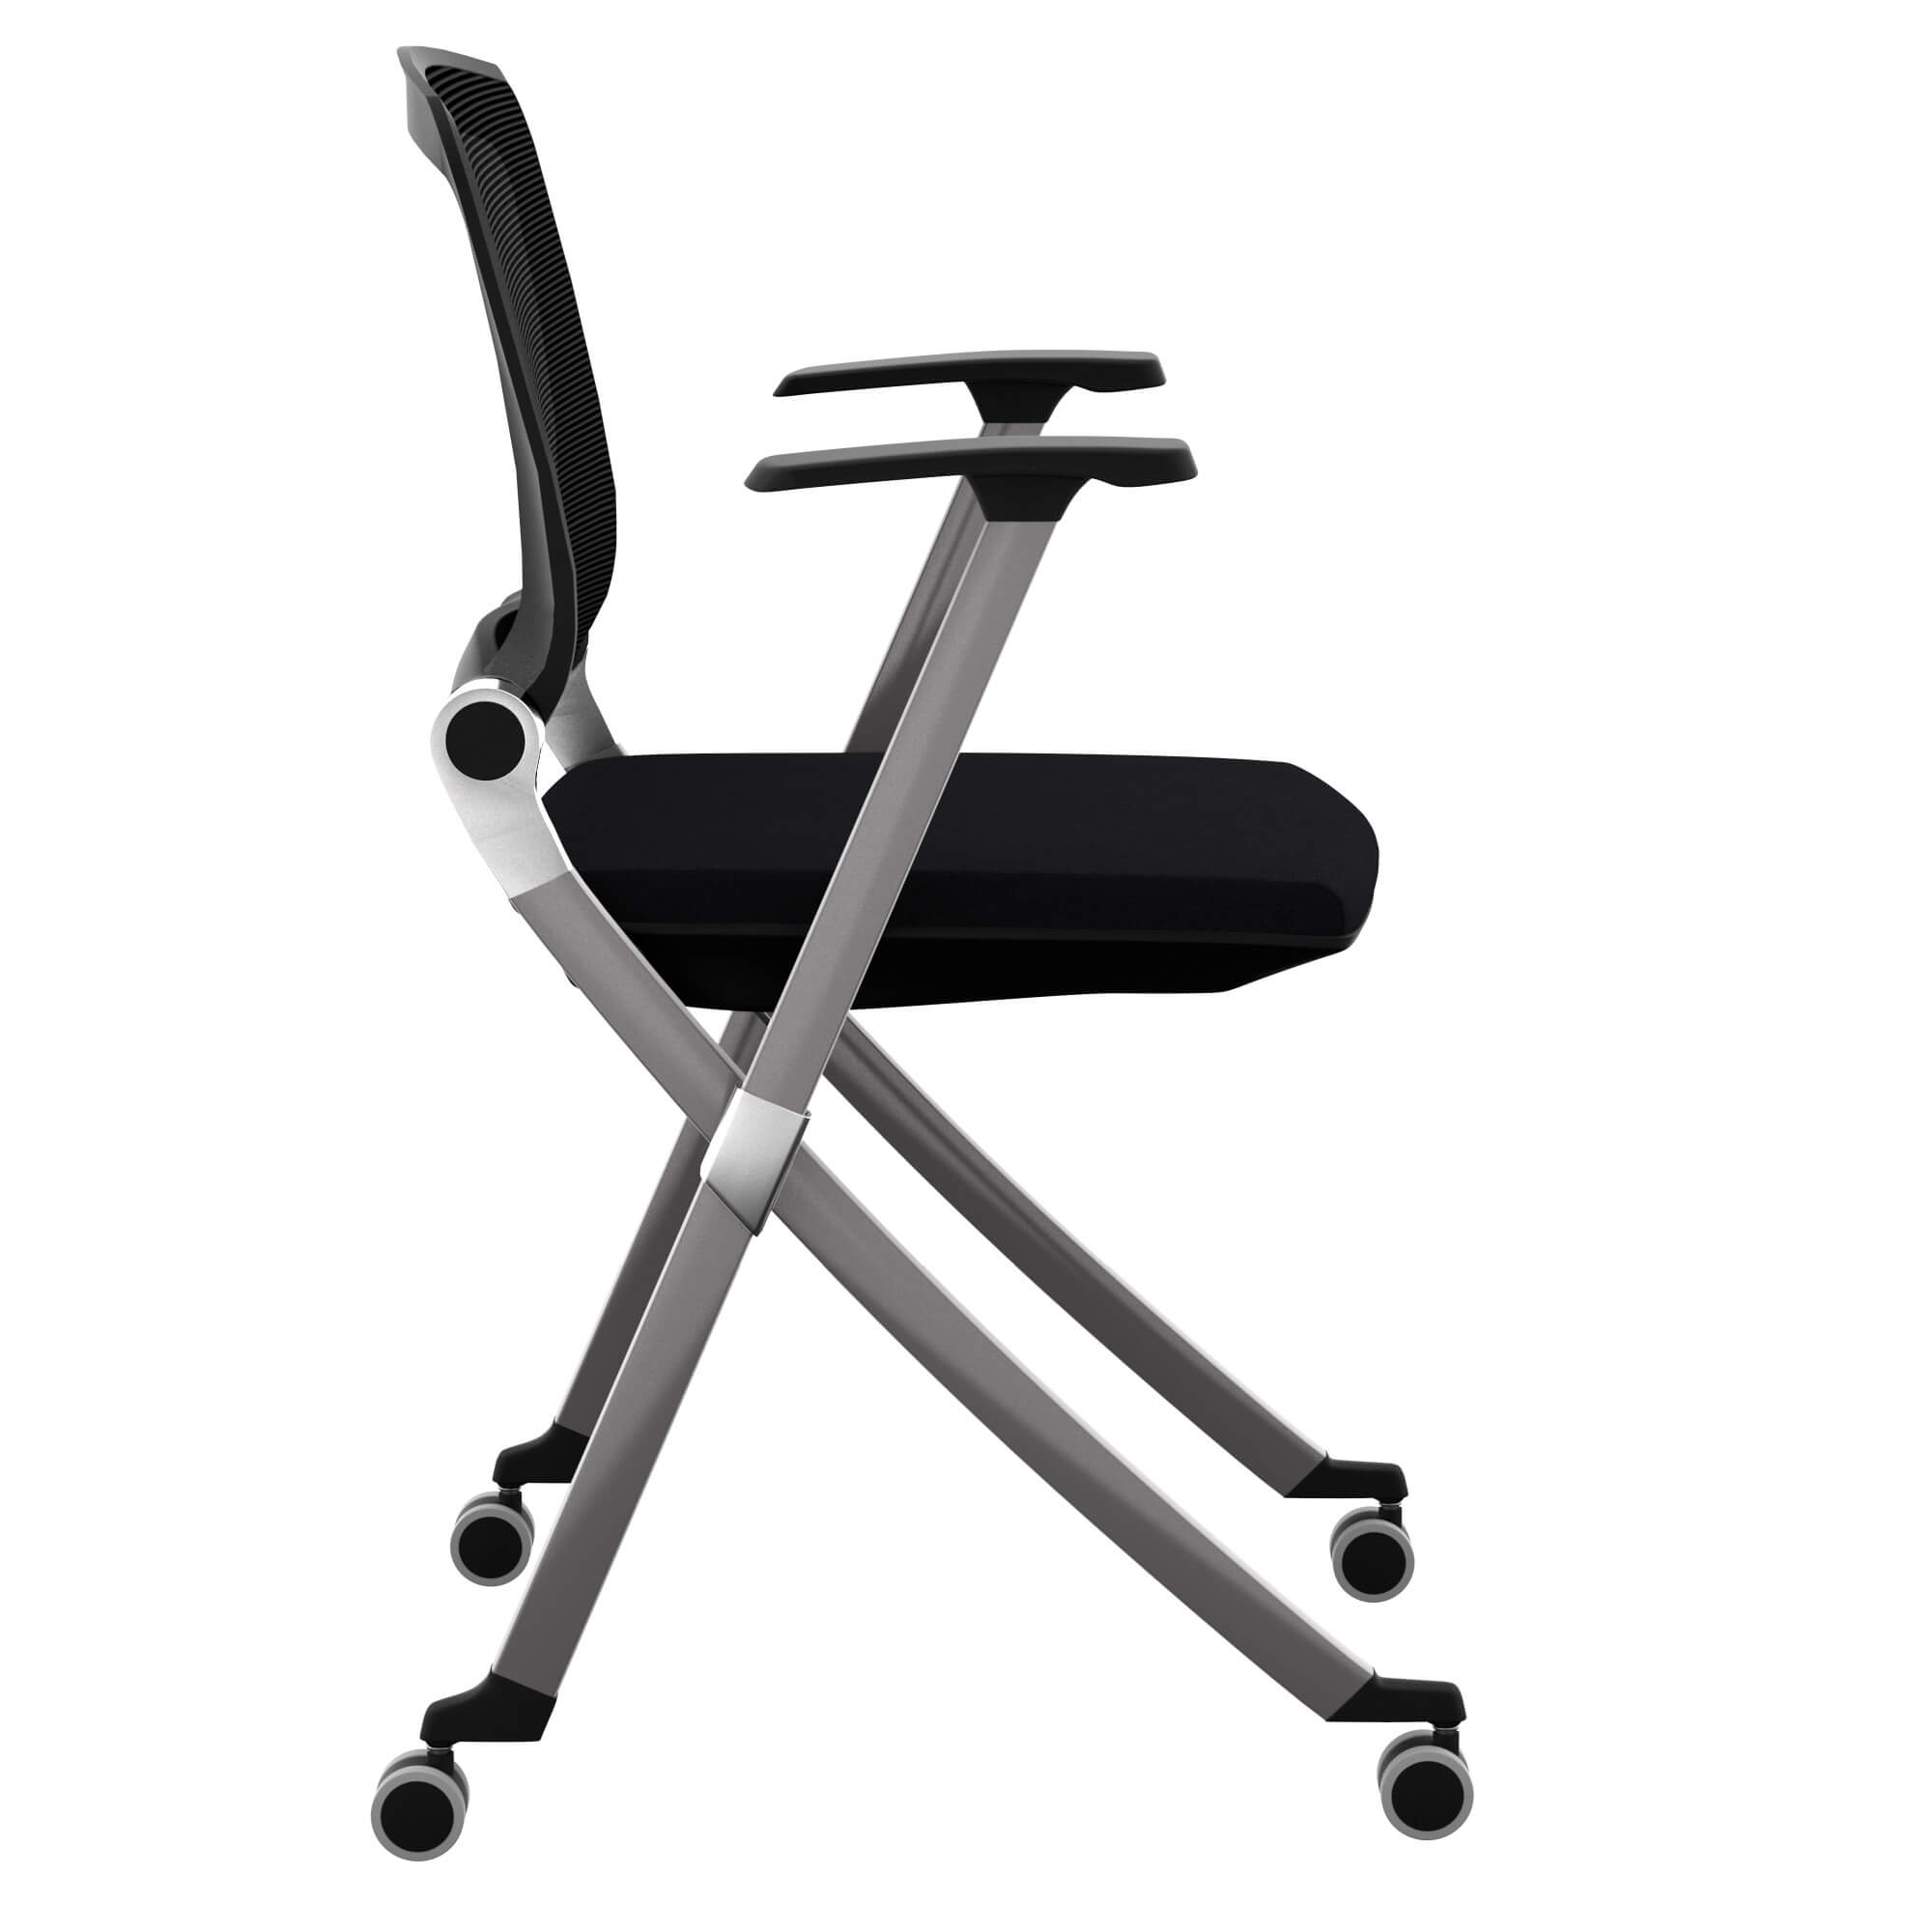 Folding office chair side view 1